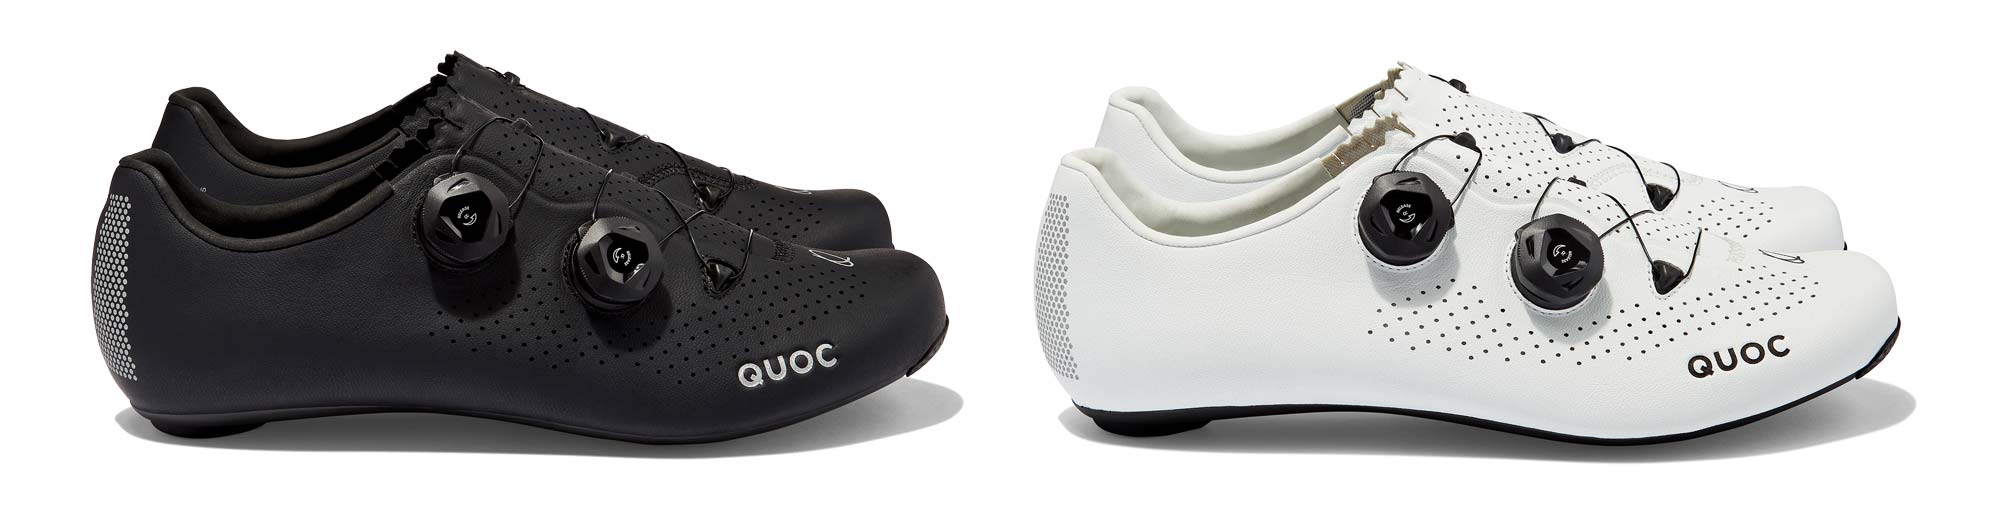 Quoc Mono II lightweight carbon-soled road cycling shoes, black or white